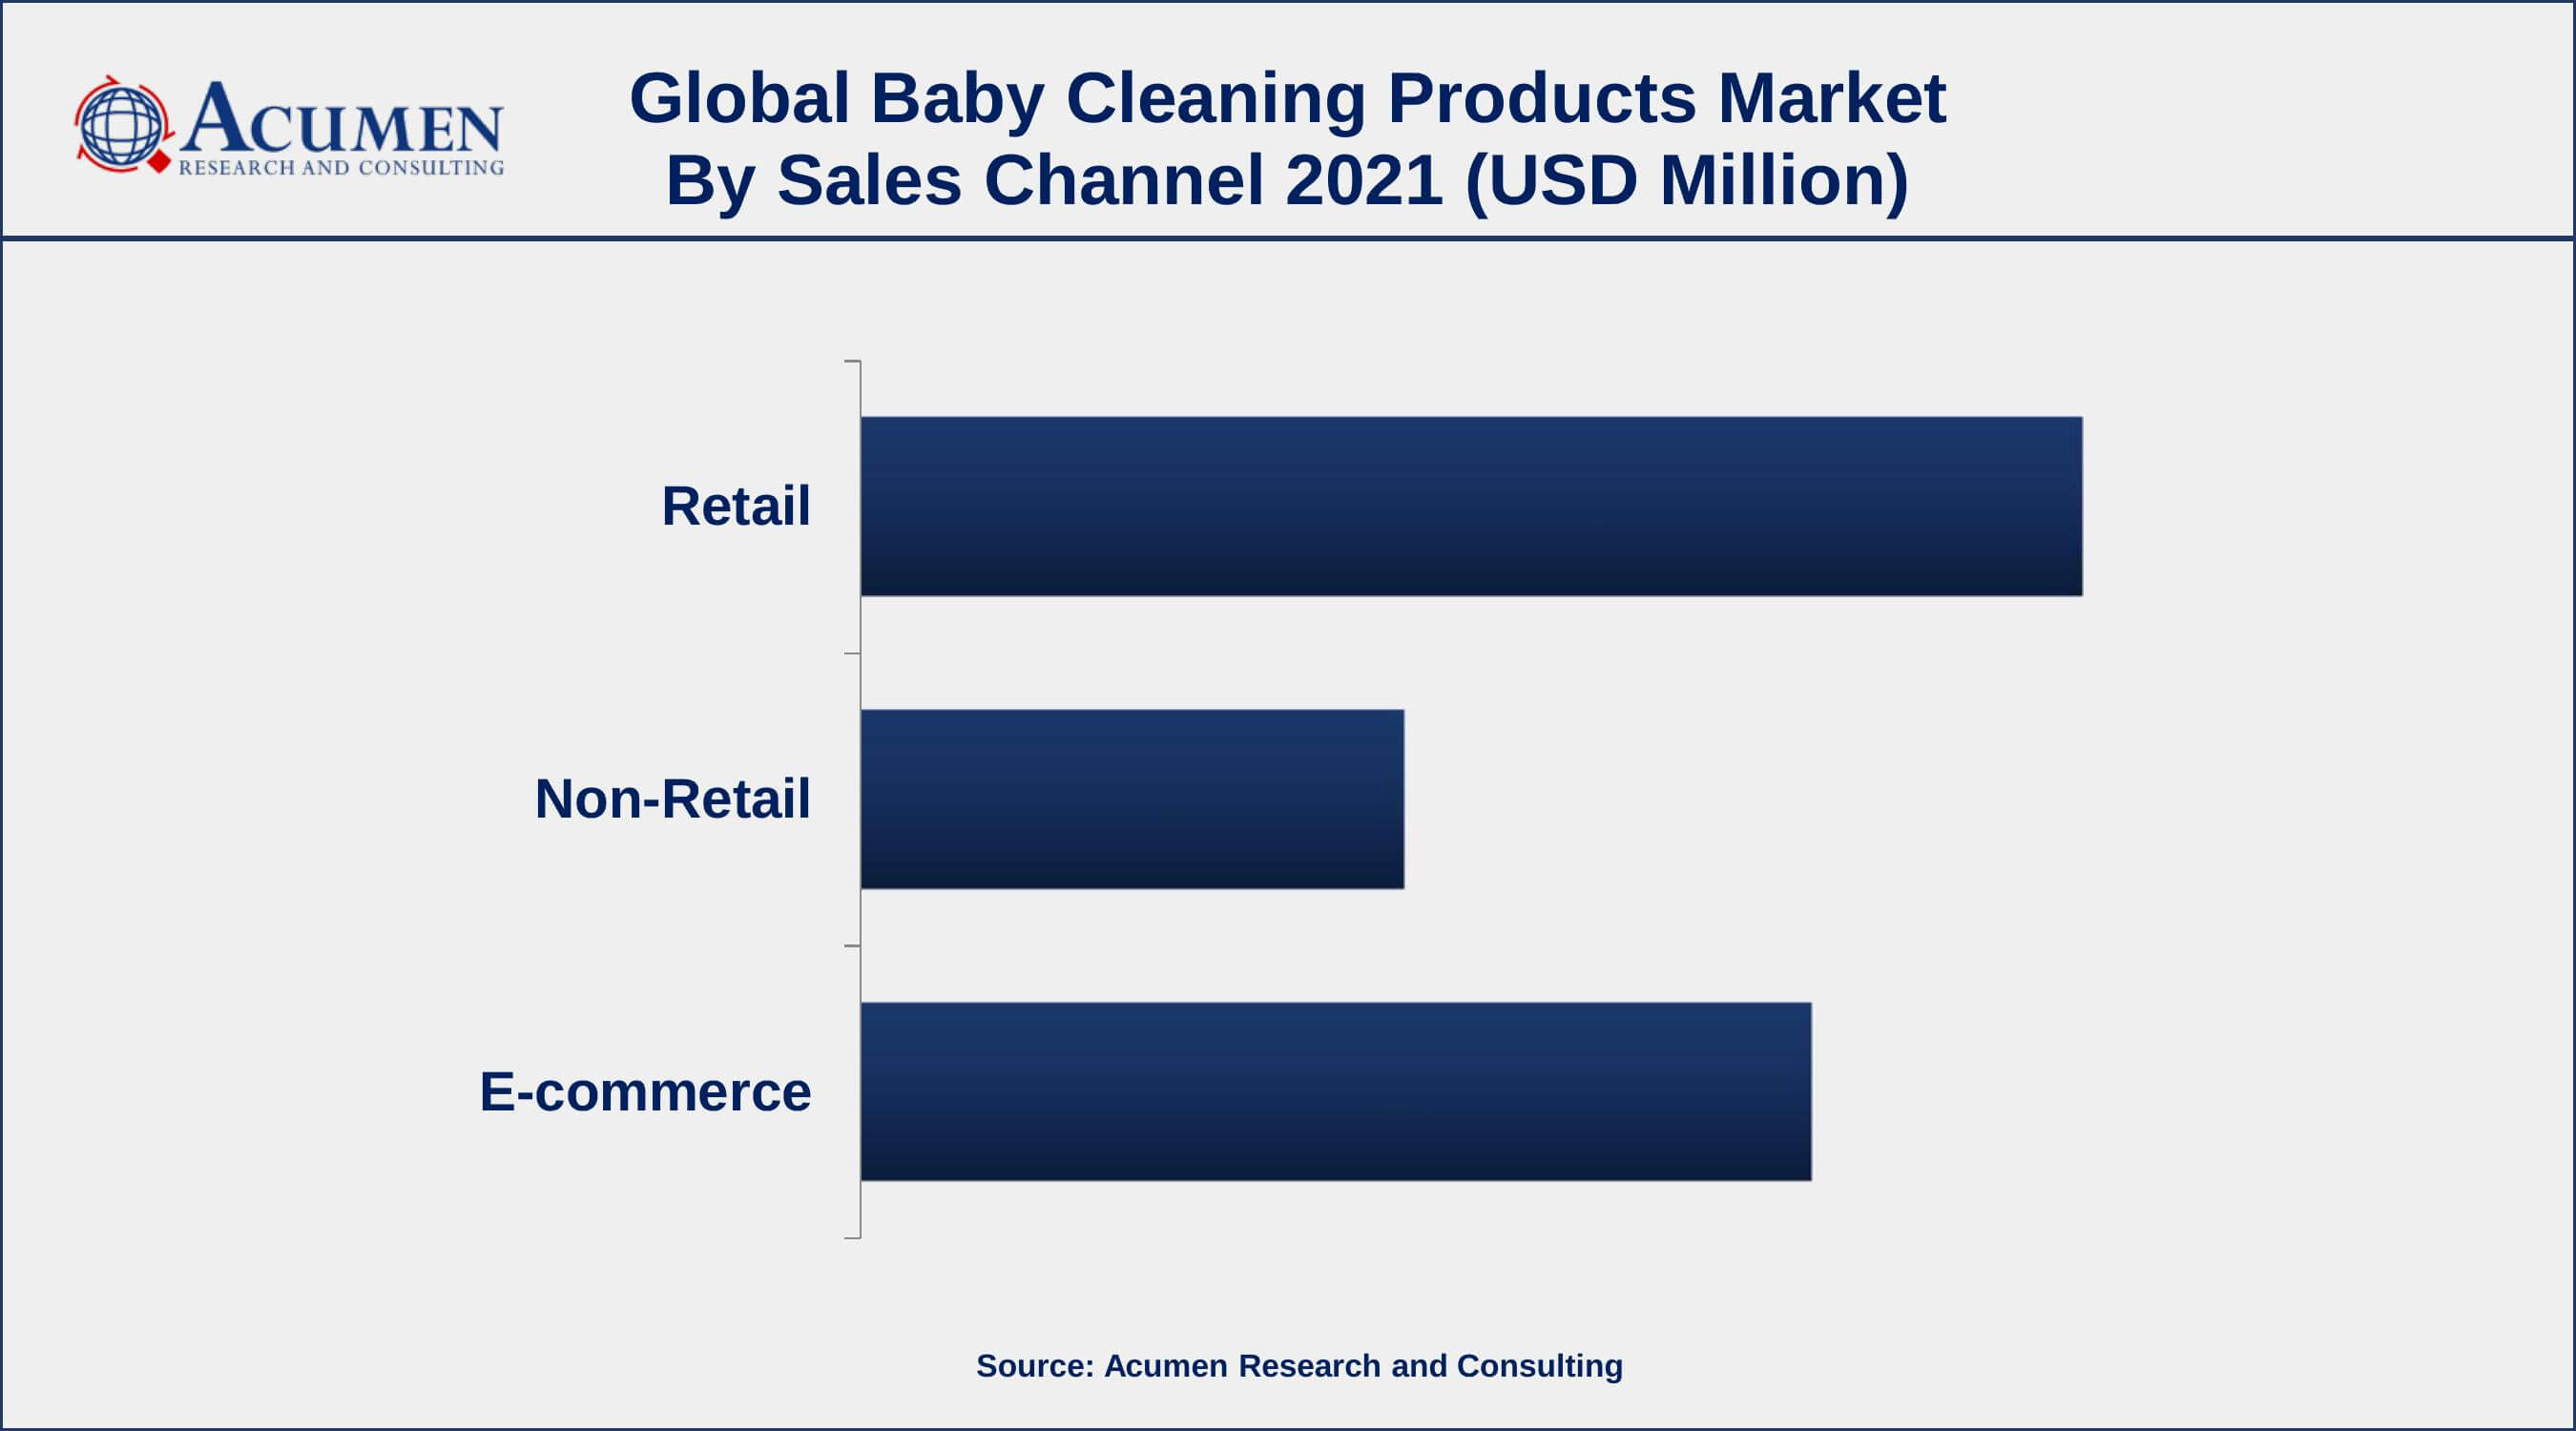 Among sales channel, retail sector engaged more than 45% of the total market share